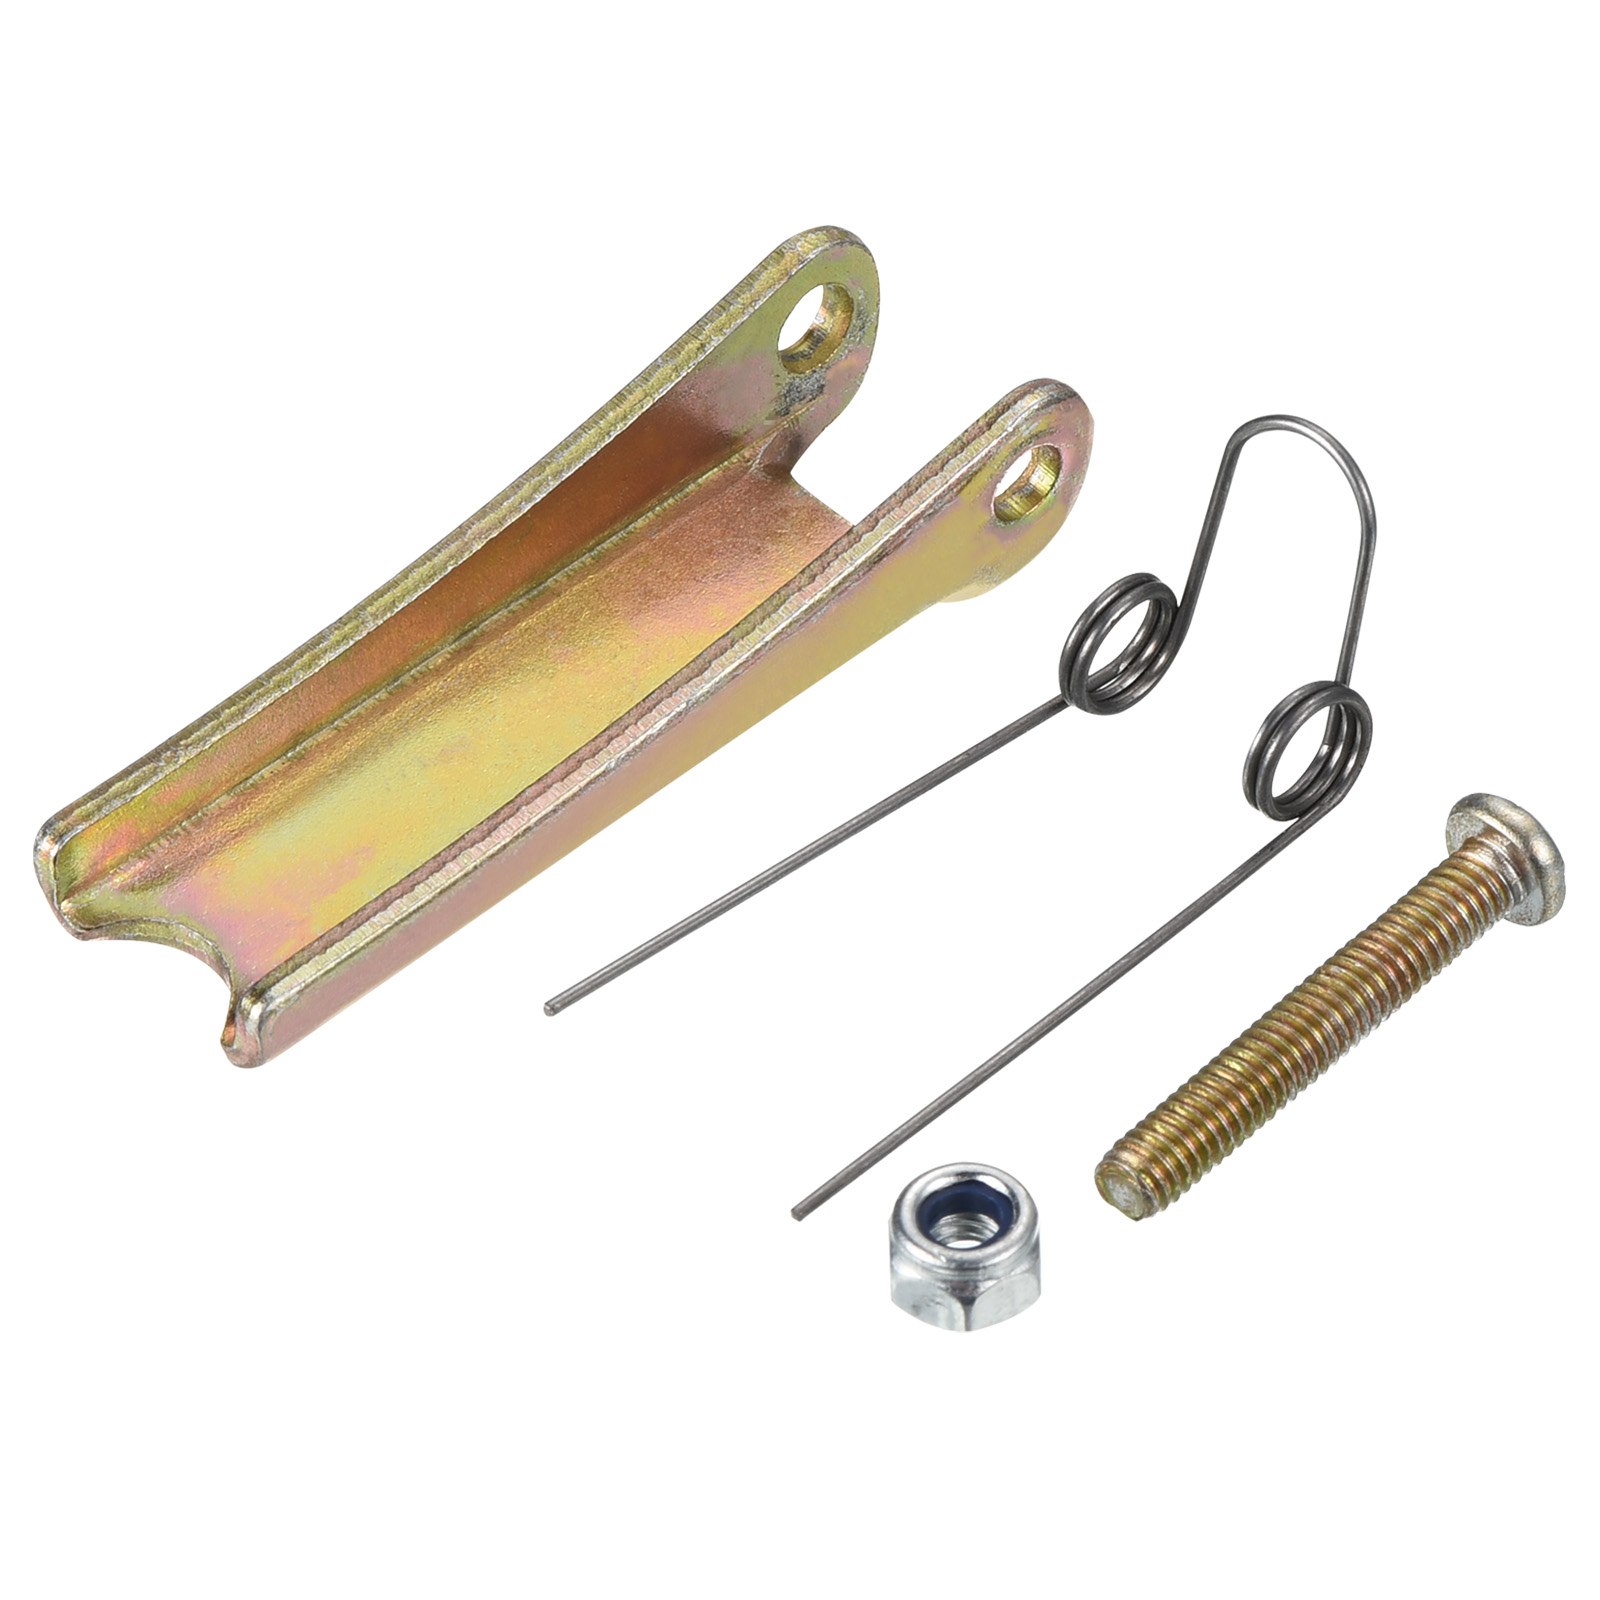 2 Inch Hook Safety Latch Kit, Metal Clevis Hook Towing Receiver Hitch Replacement, Zinc Plating, 2 Pack - image 5 of 6